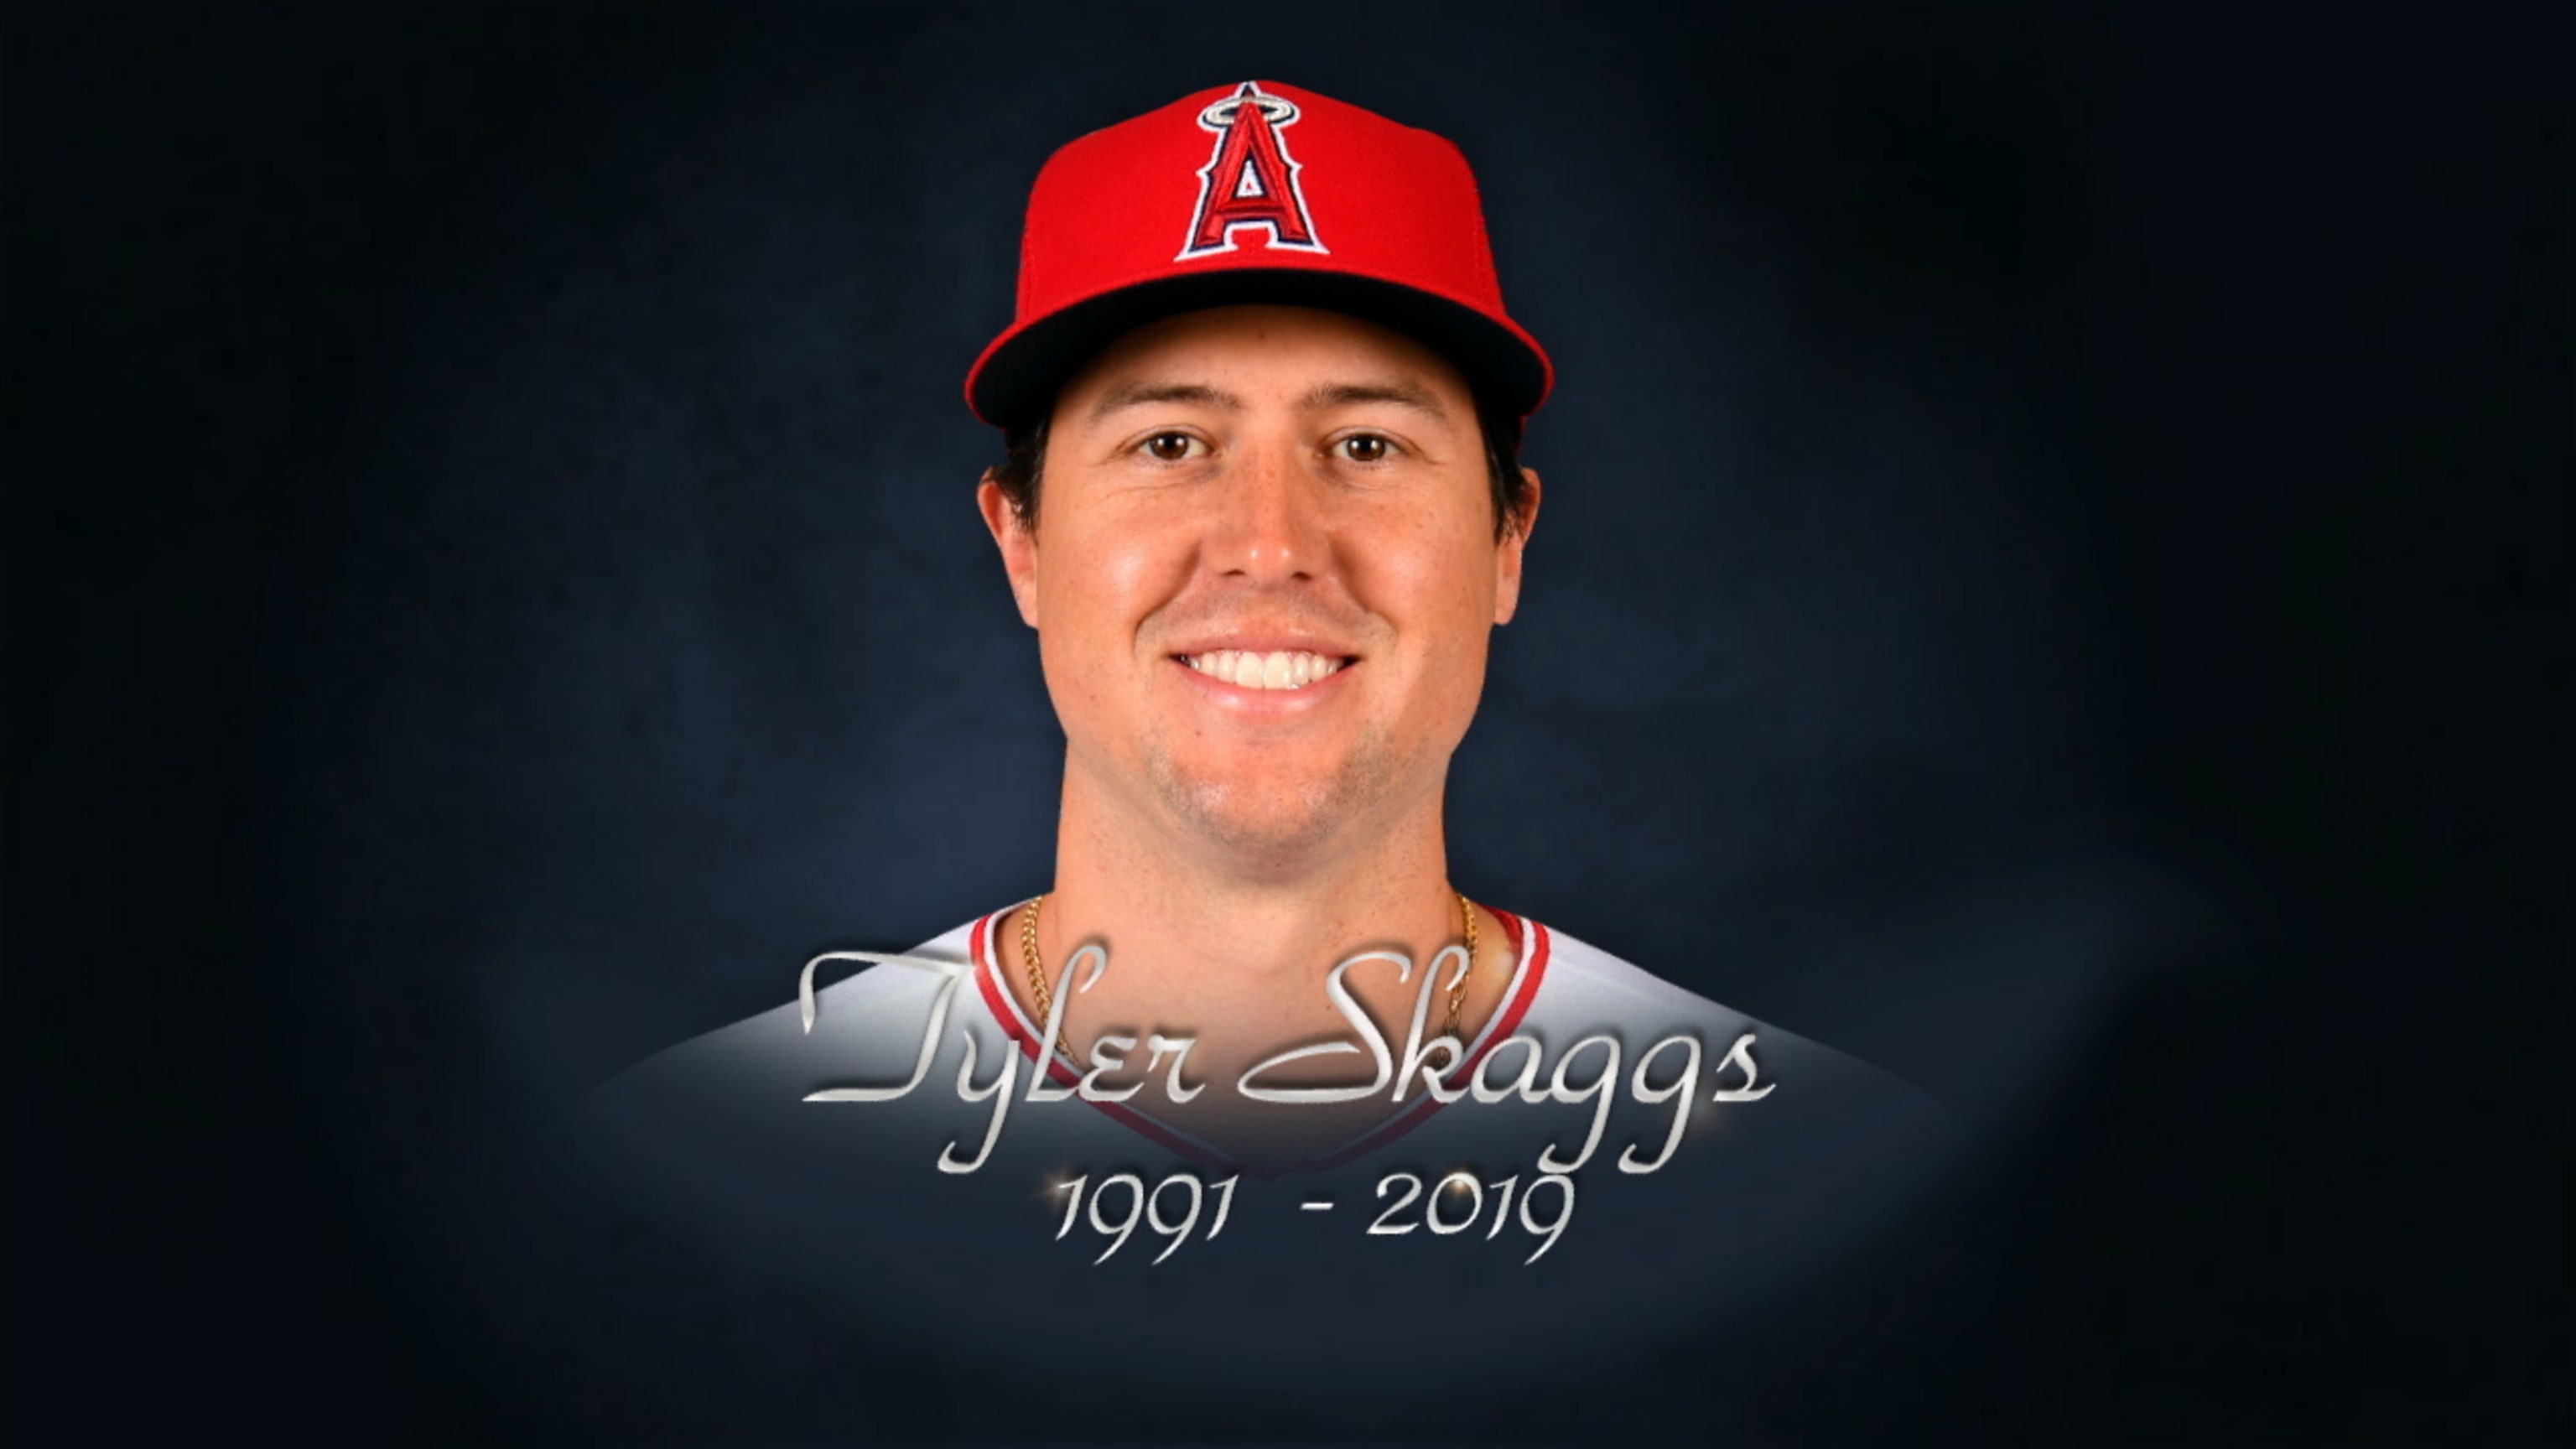 MLB News: Angels pitcher Tyler Skaggs passes away at 27 - Battery